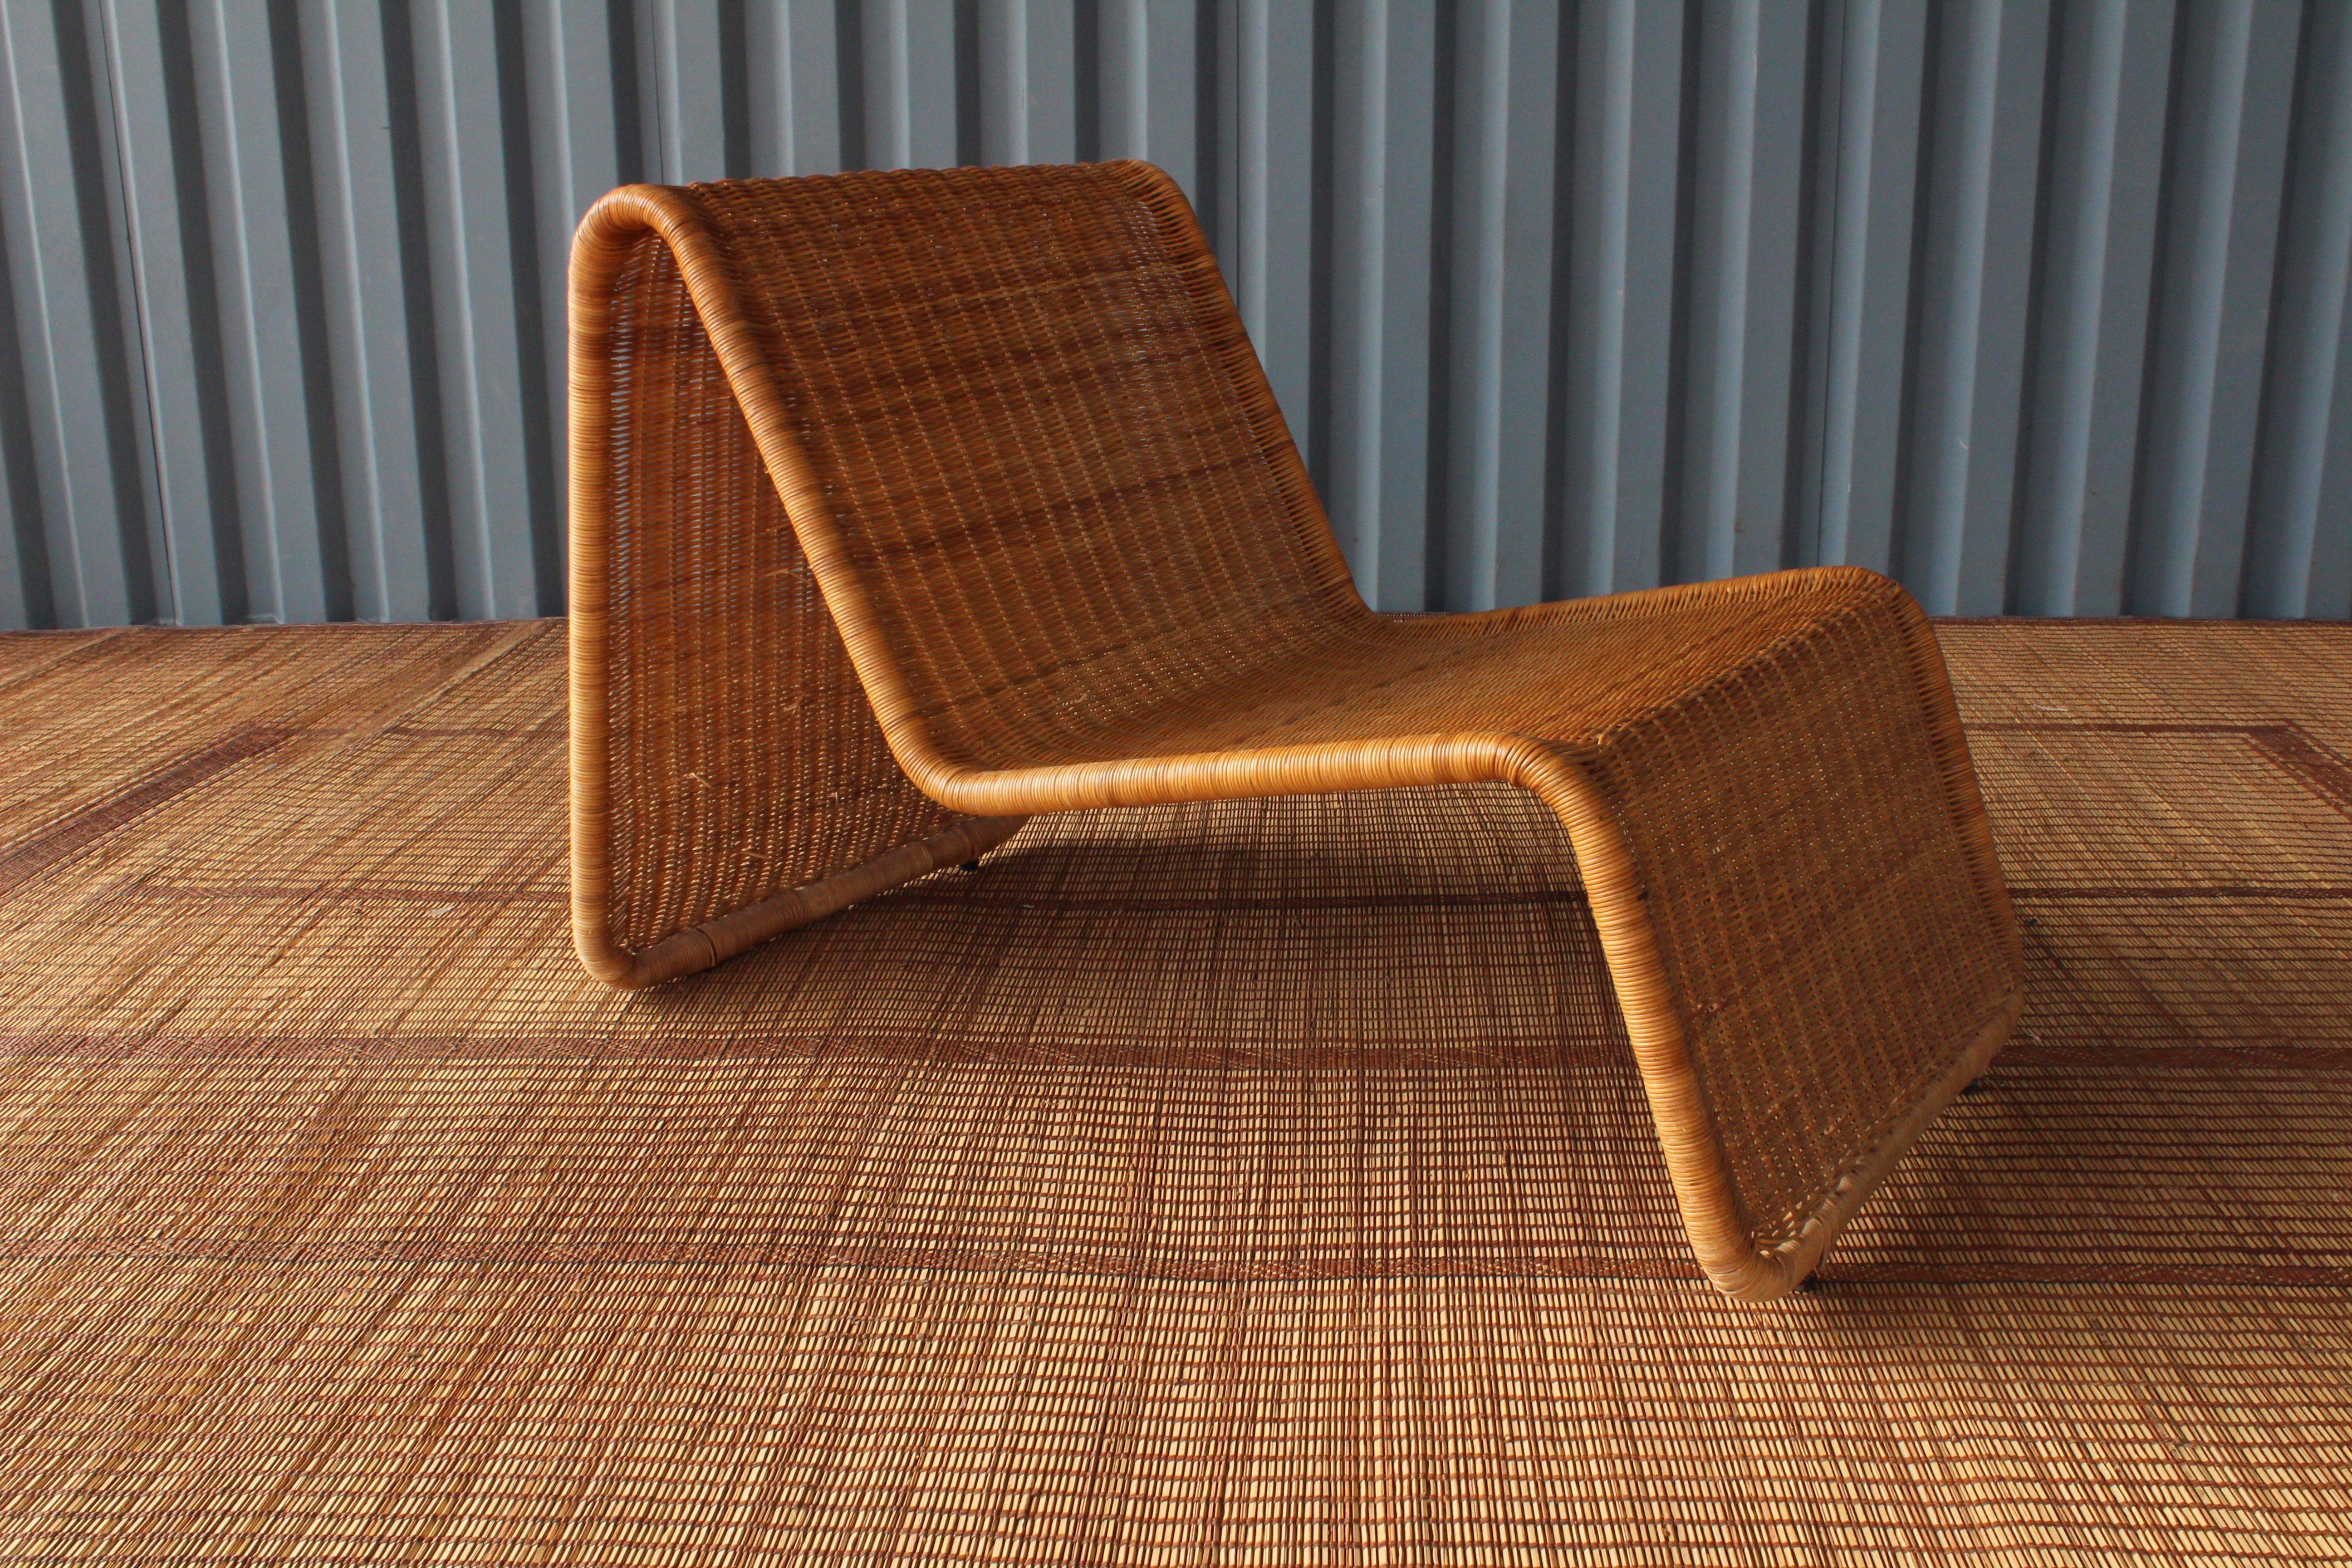 Amazing pair of Tito Agnoli P3 lounge chairs for Bonacina, Italy, 1960s. Woven wicker on a tubular steel frame. Not only a great design but comfortable as well. Perfect for indoor or outdoor use. Both chairs are in excellent condition.